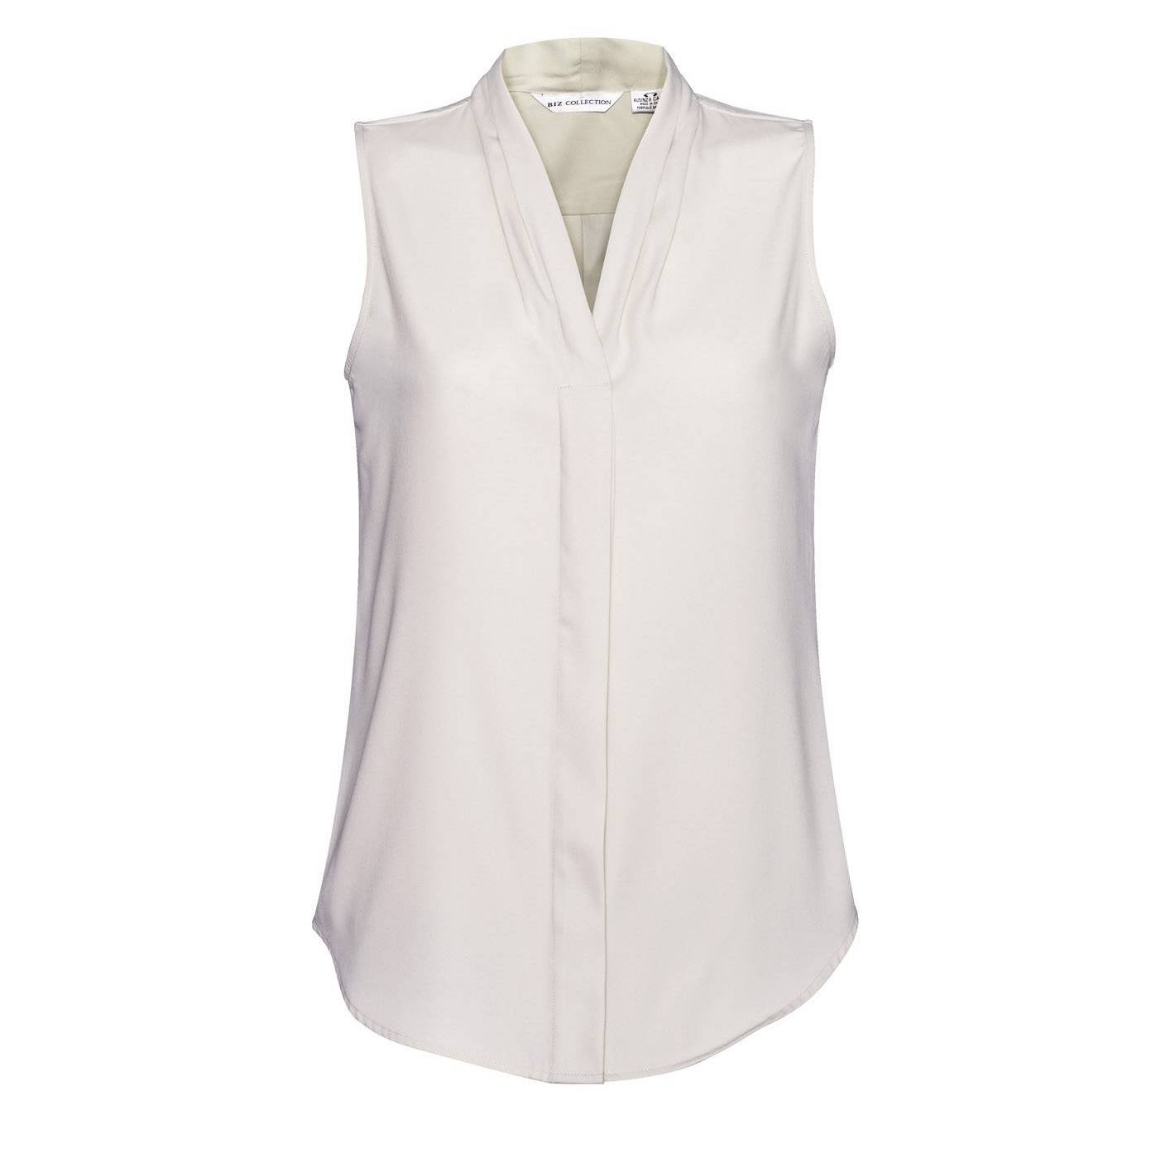 Picture of Biz Collection, Madison Ladies Sleeveless Blouse